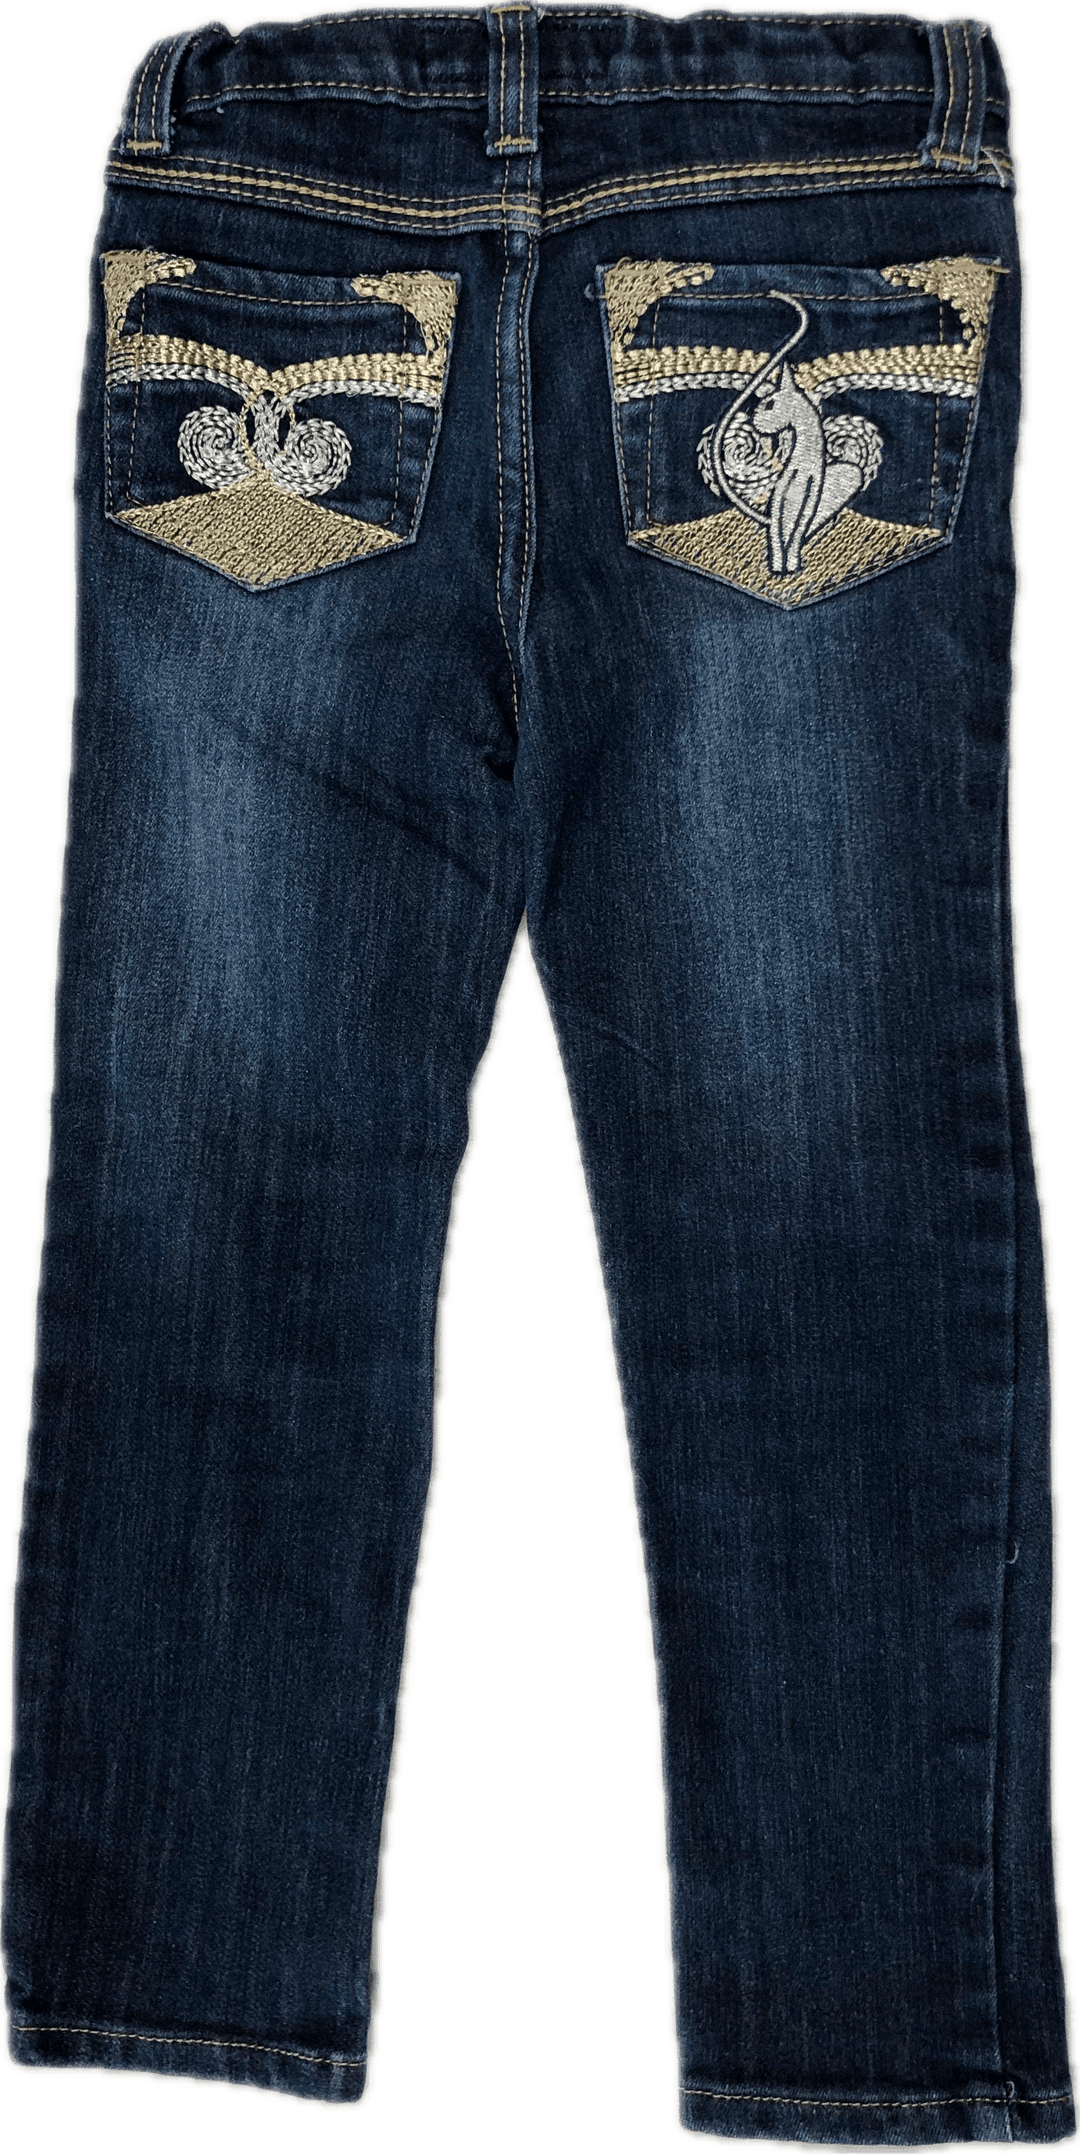 Baby Phat Girls Embroidered Logo Pocket Jeans - Size 4 - Jean Pool